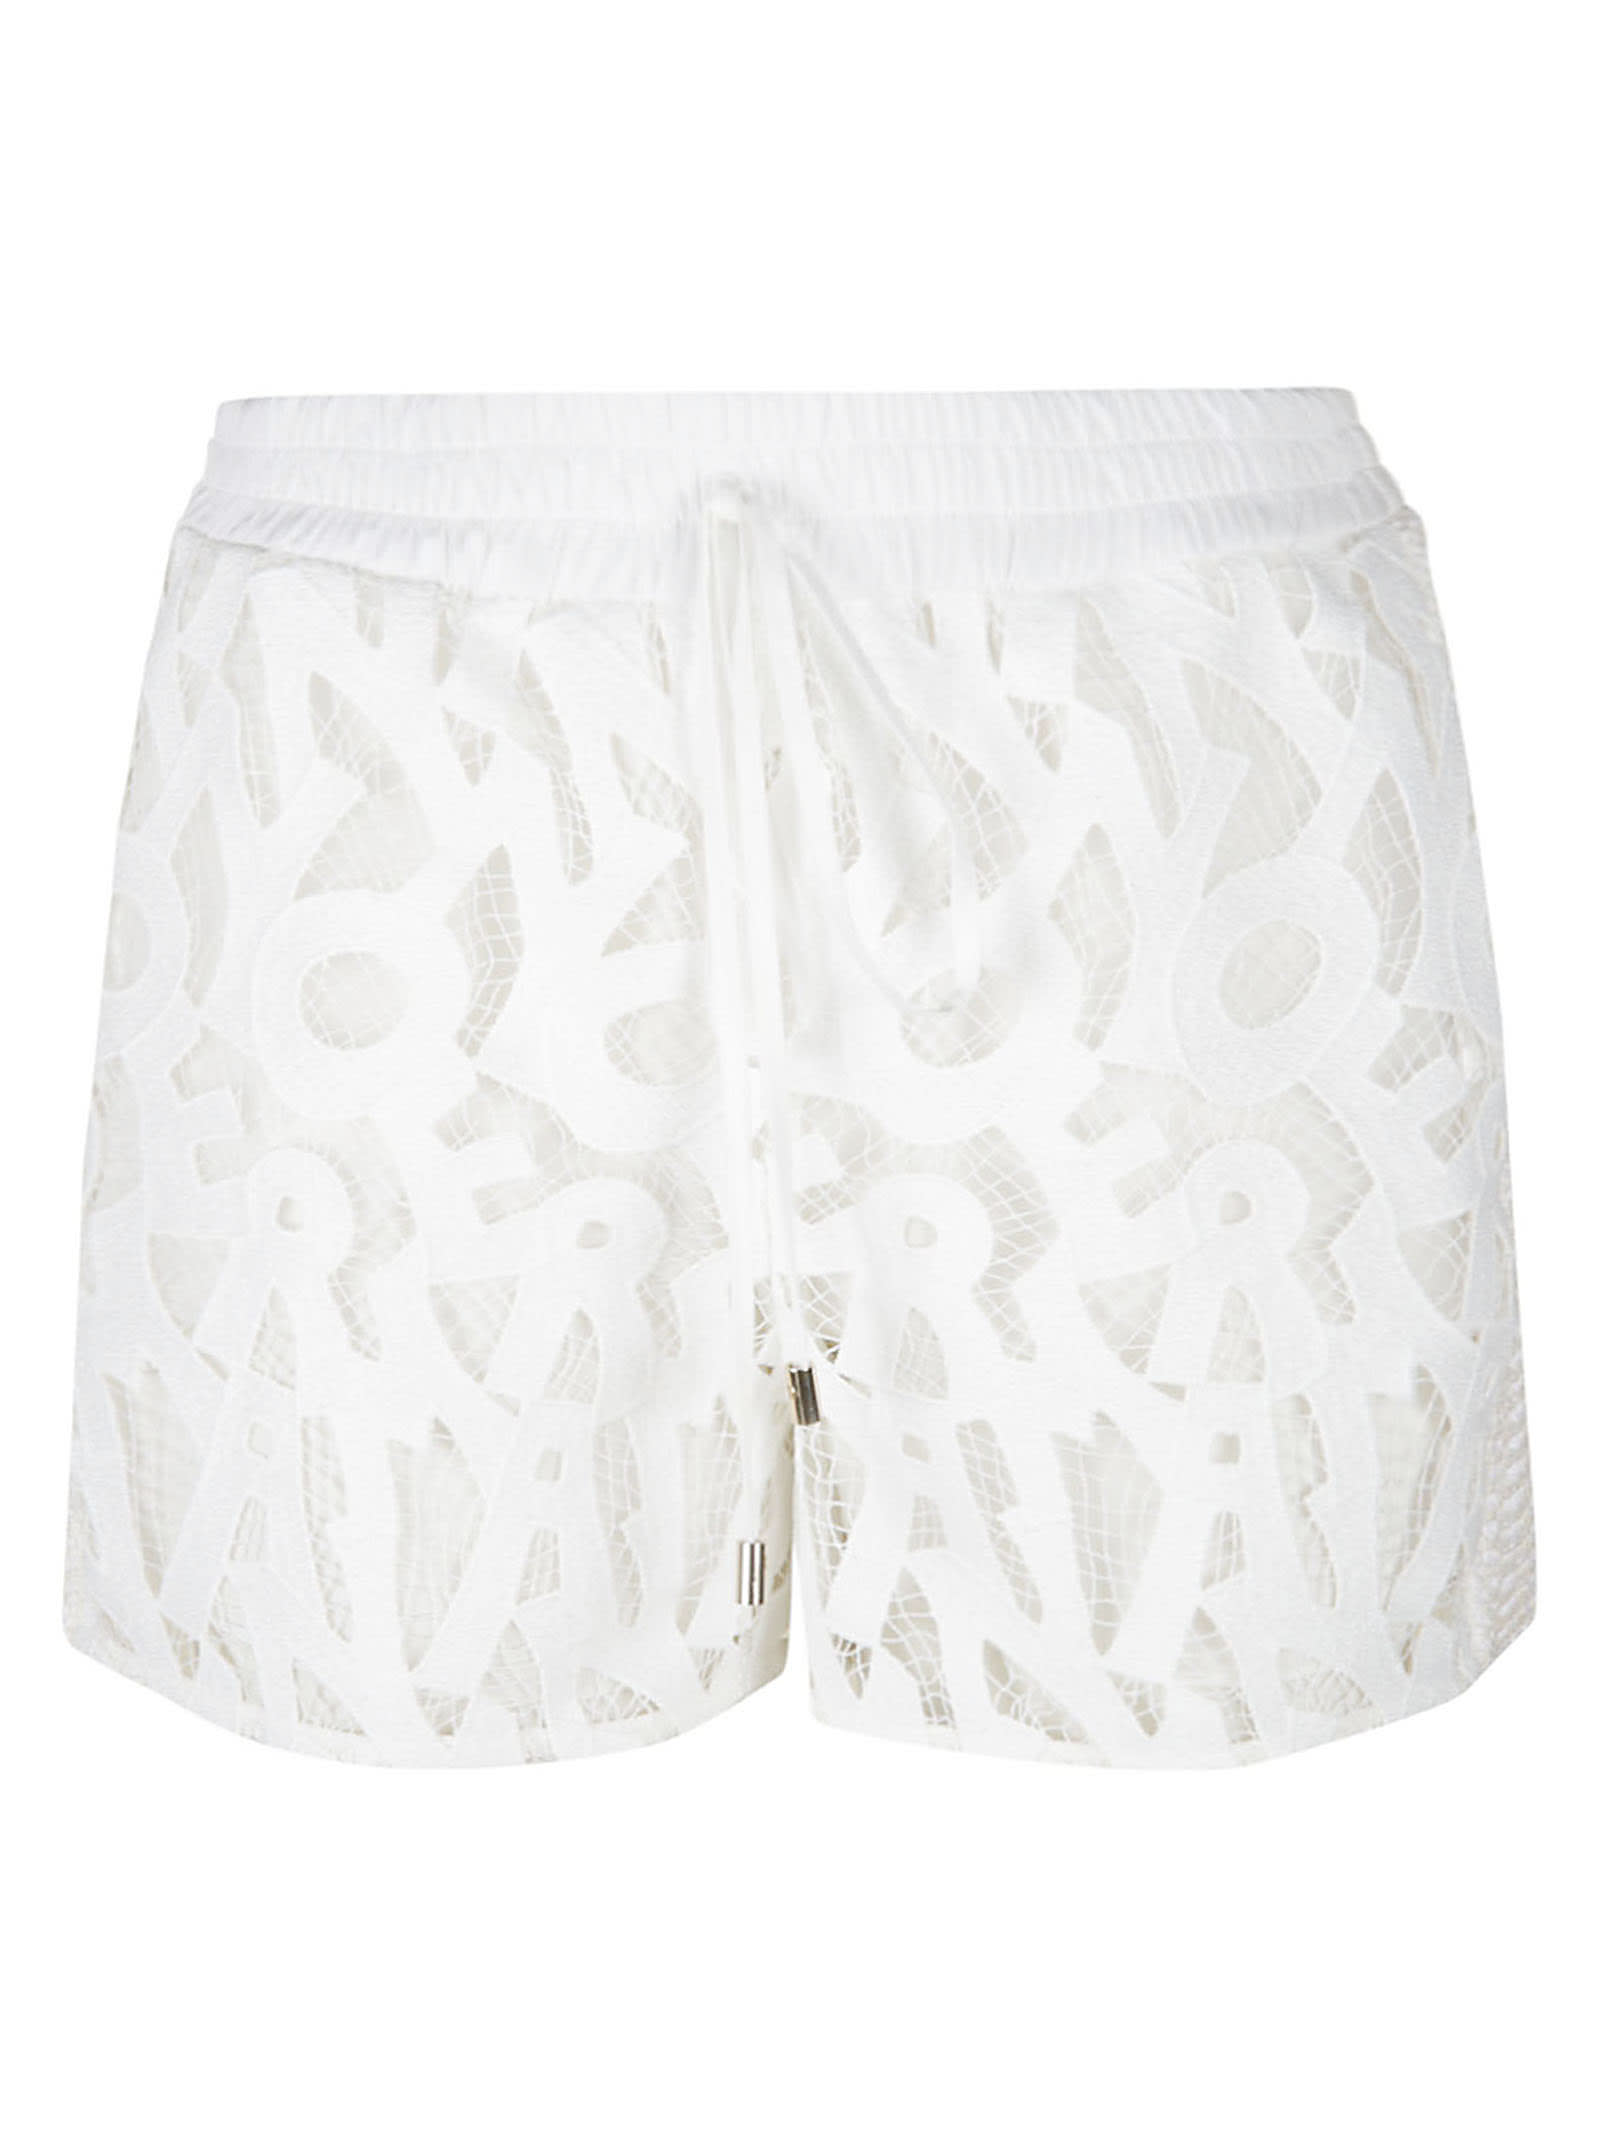 Ermanno Scervino Drawstring Waist Perforated Shorts